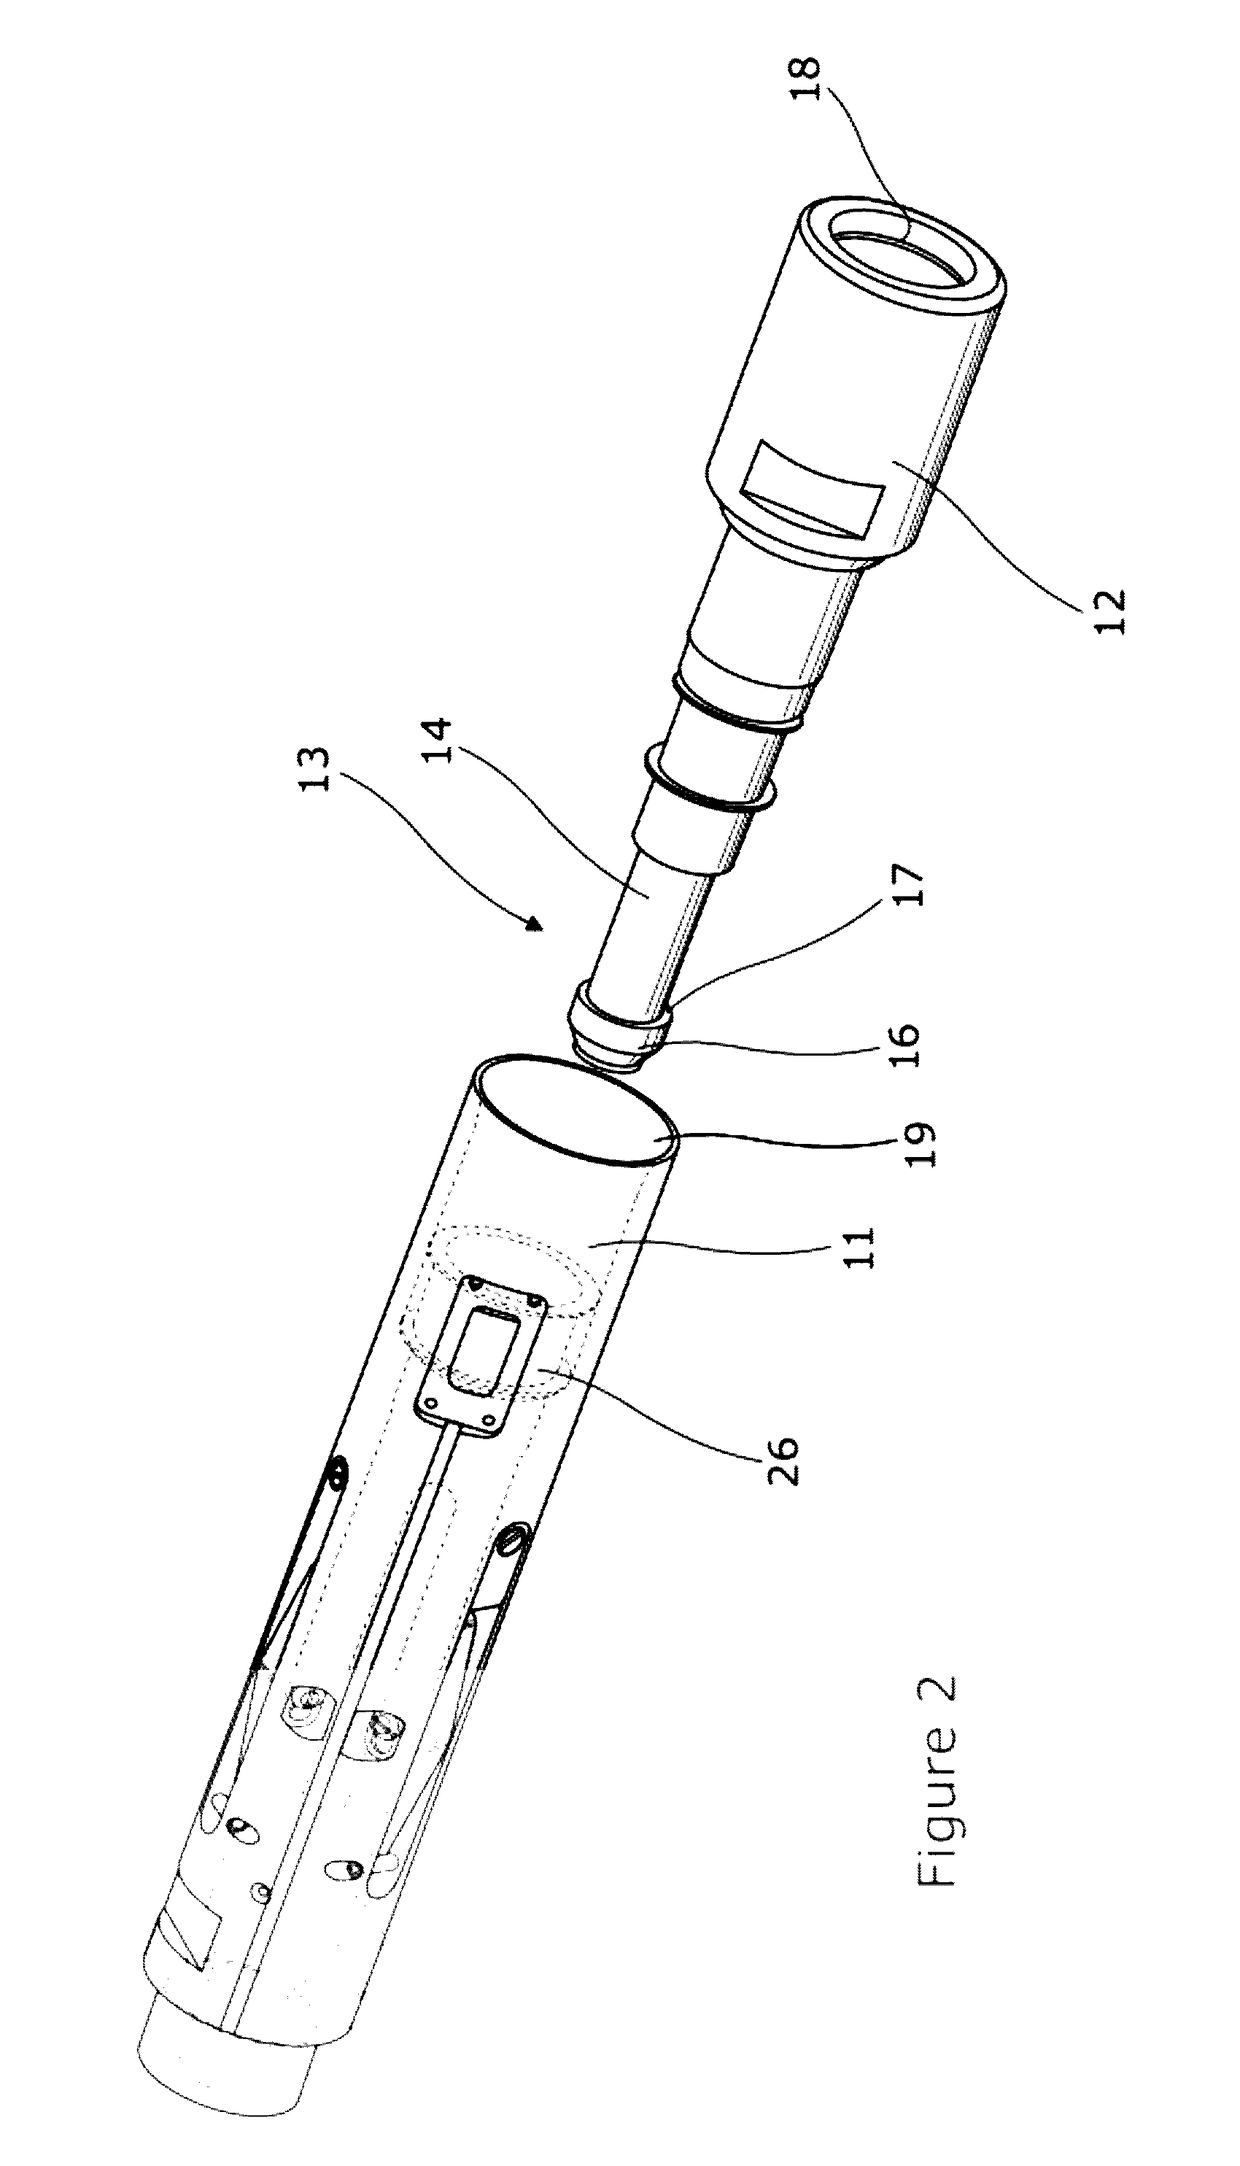 Downhole Tool Coupling and Method of its Use